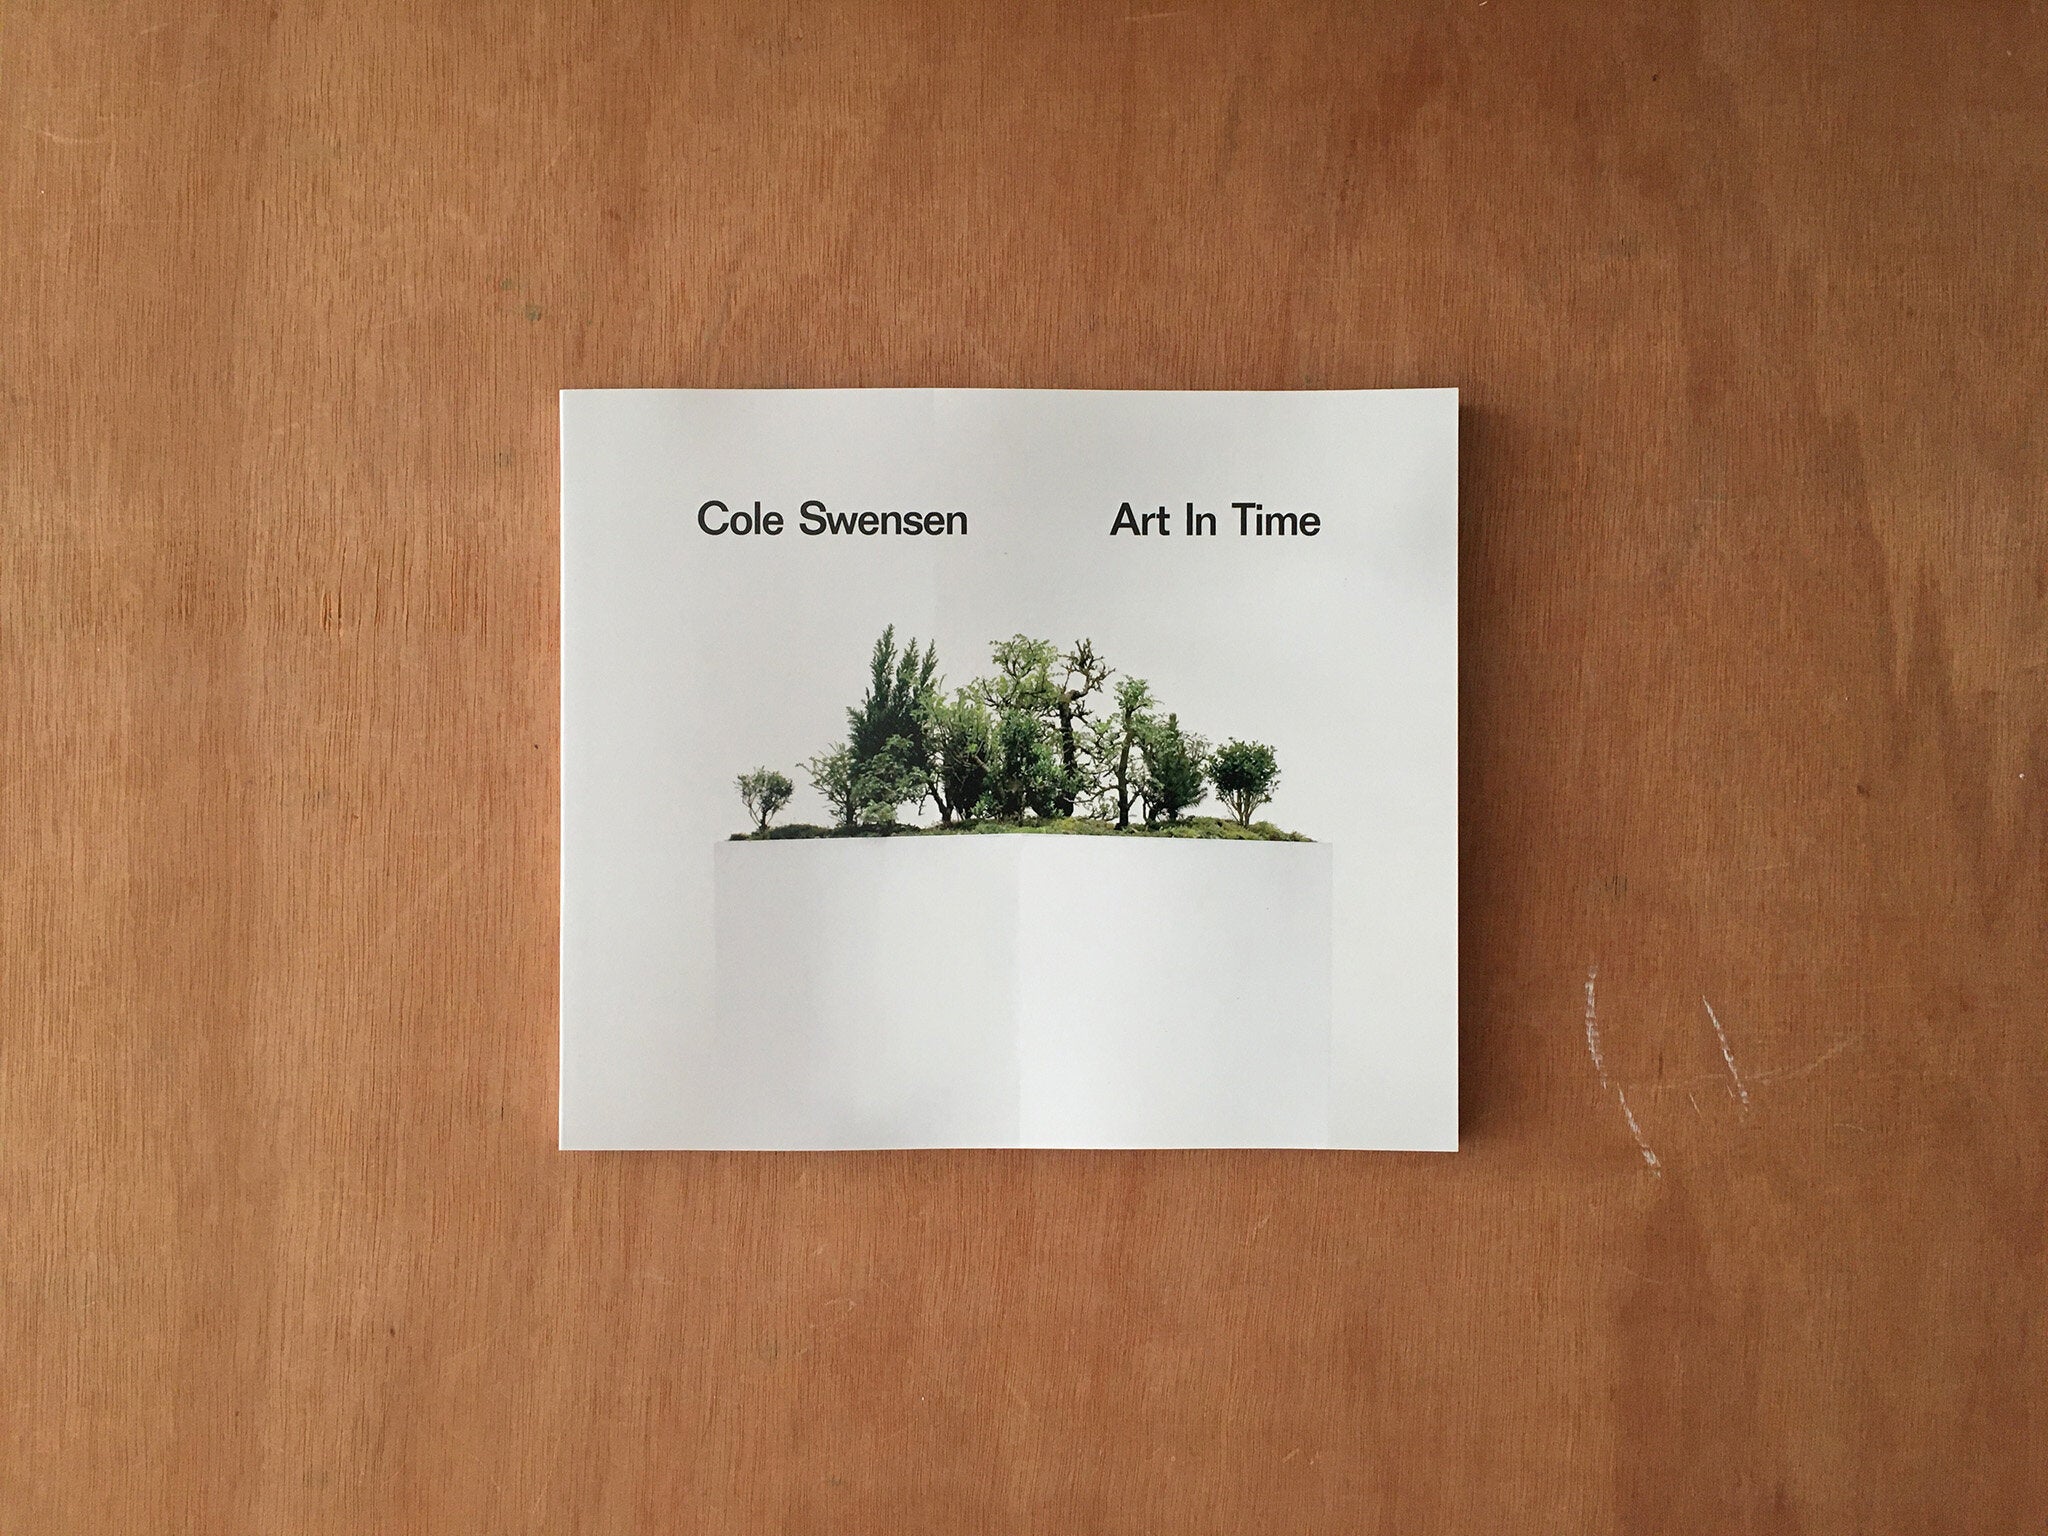 ART IN TIME by Cole Swensen